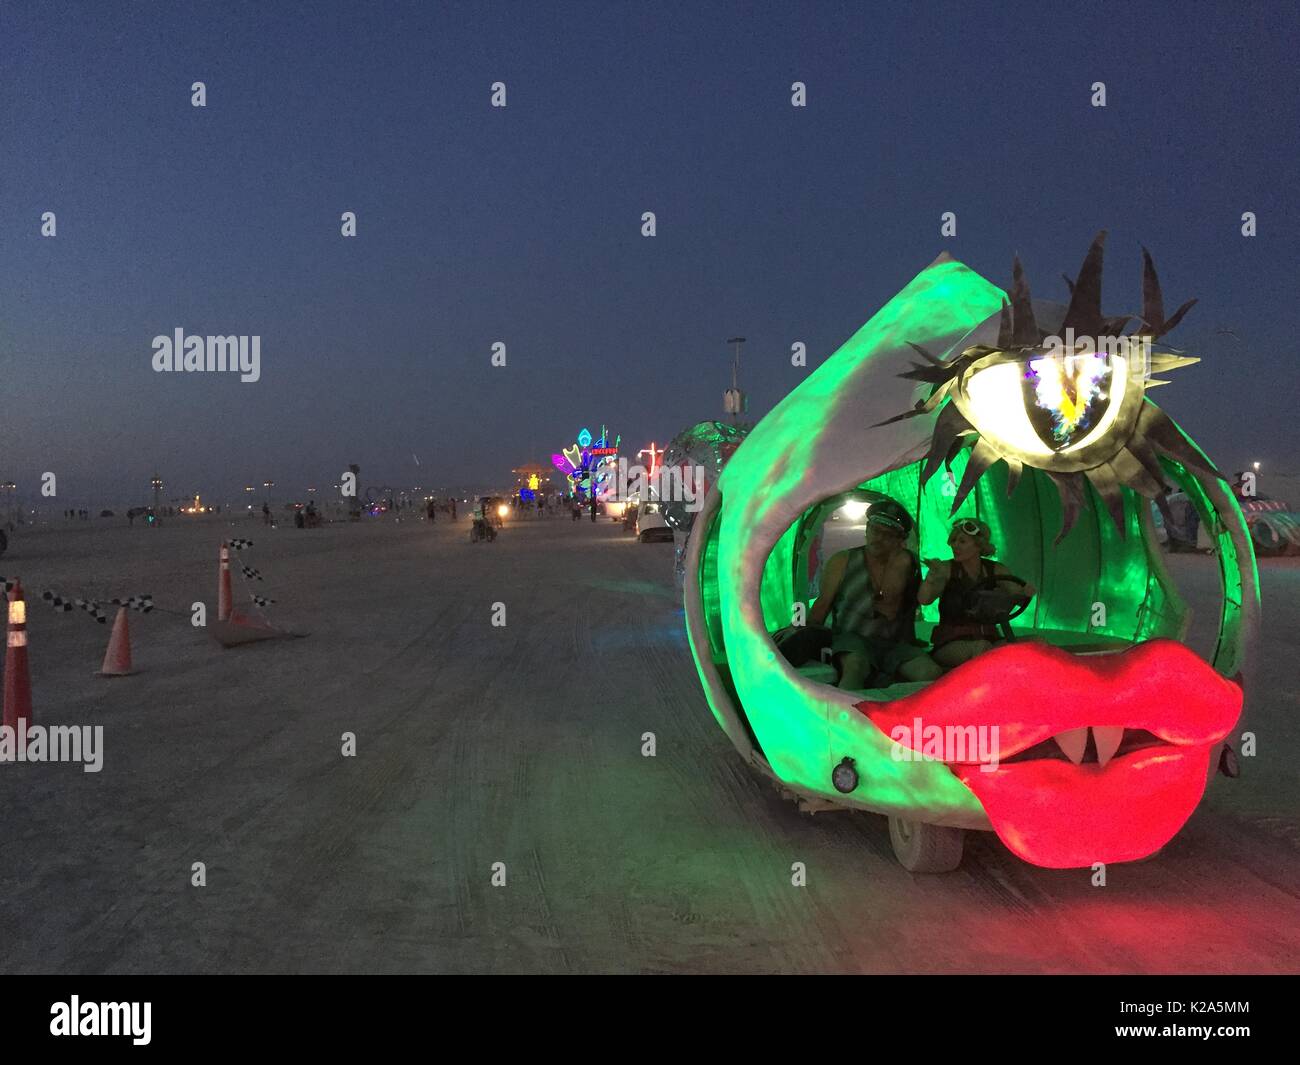 Mutant vehicles parade on the playa as the annual desert festival Burning Man August 28, 2017 in Black Rock City, Nevada. The annual festival attracts 70,000 attendees in one of the most remote and inhospitable deserts in America. Stock Photo